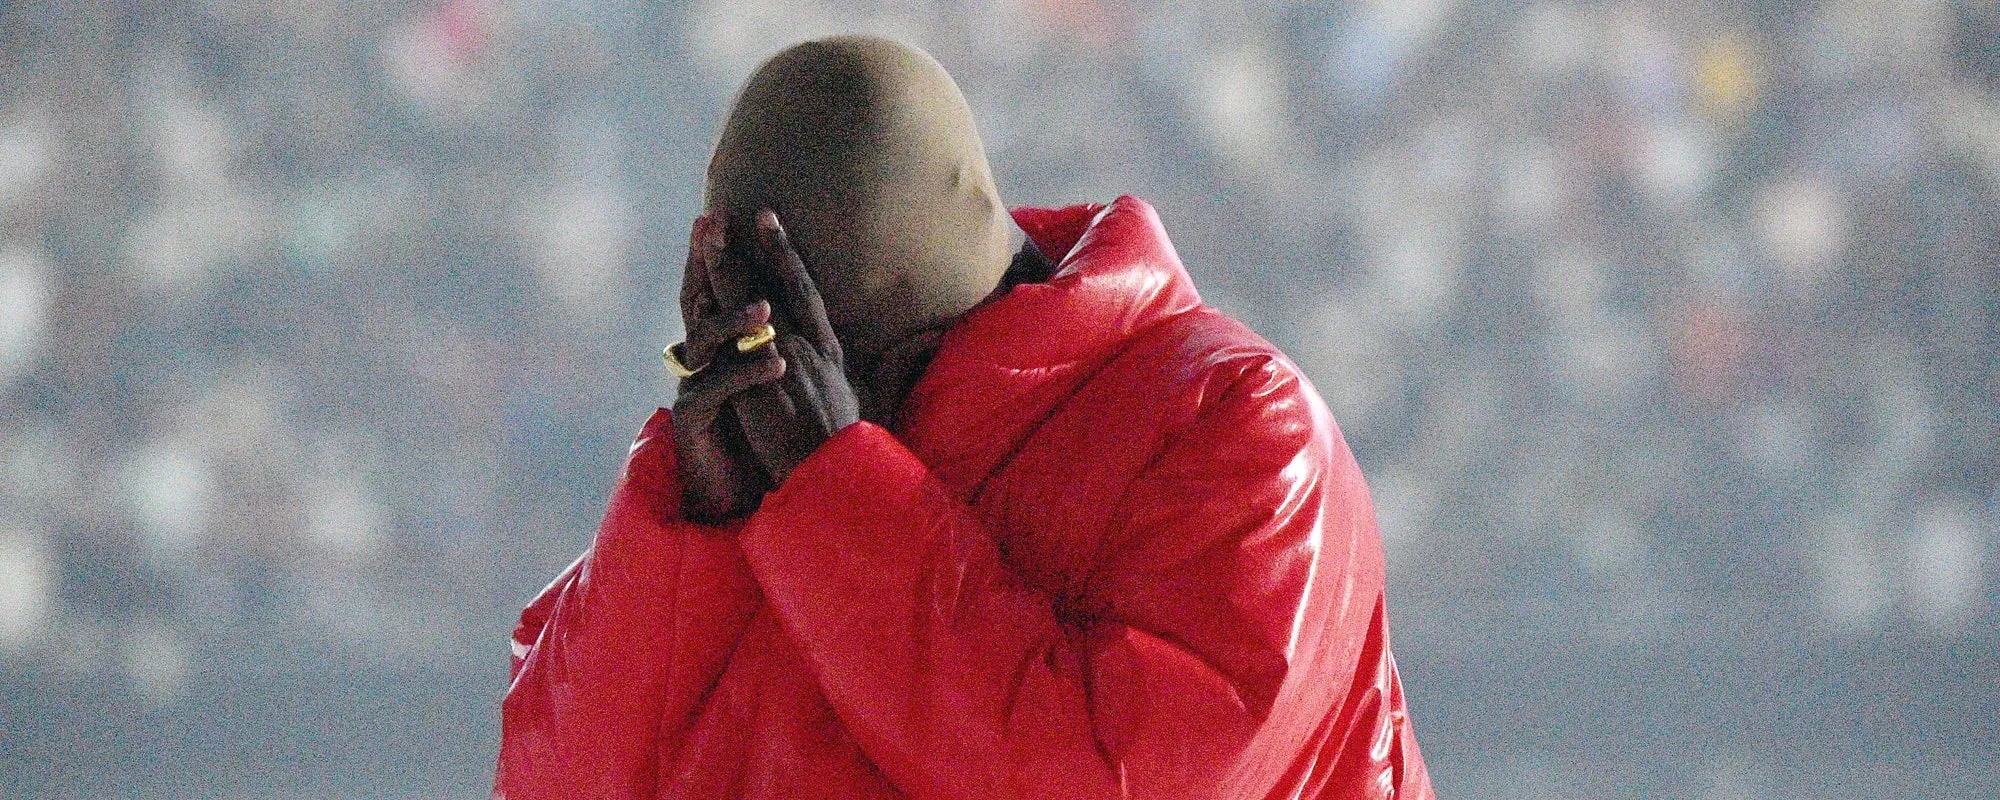 Kanye West Banned from Instagram for 24 Hours for Threatening Messages